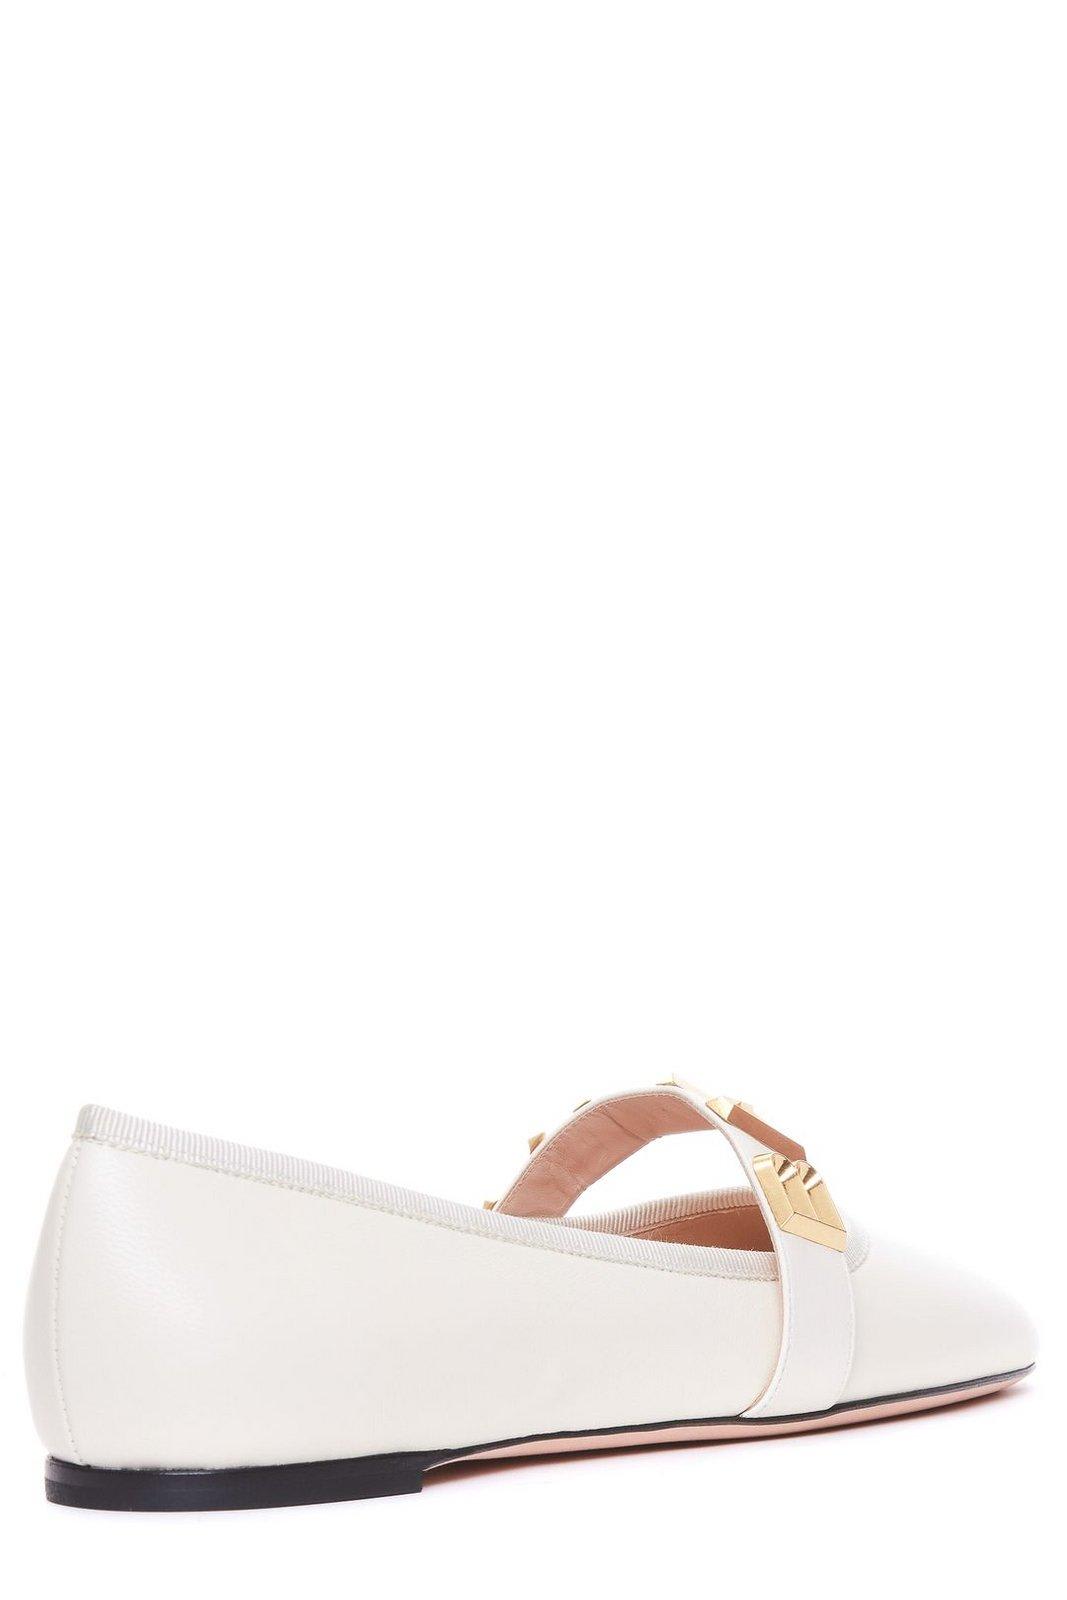 Shop Bally Balby Squared Toe Ballet Flats In Neutrals